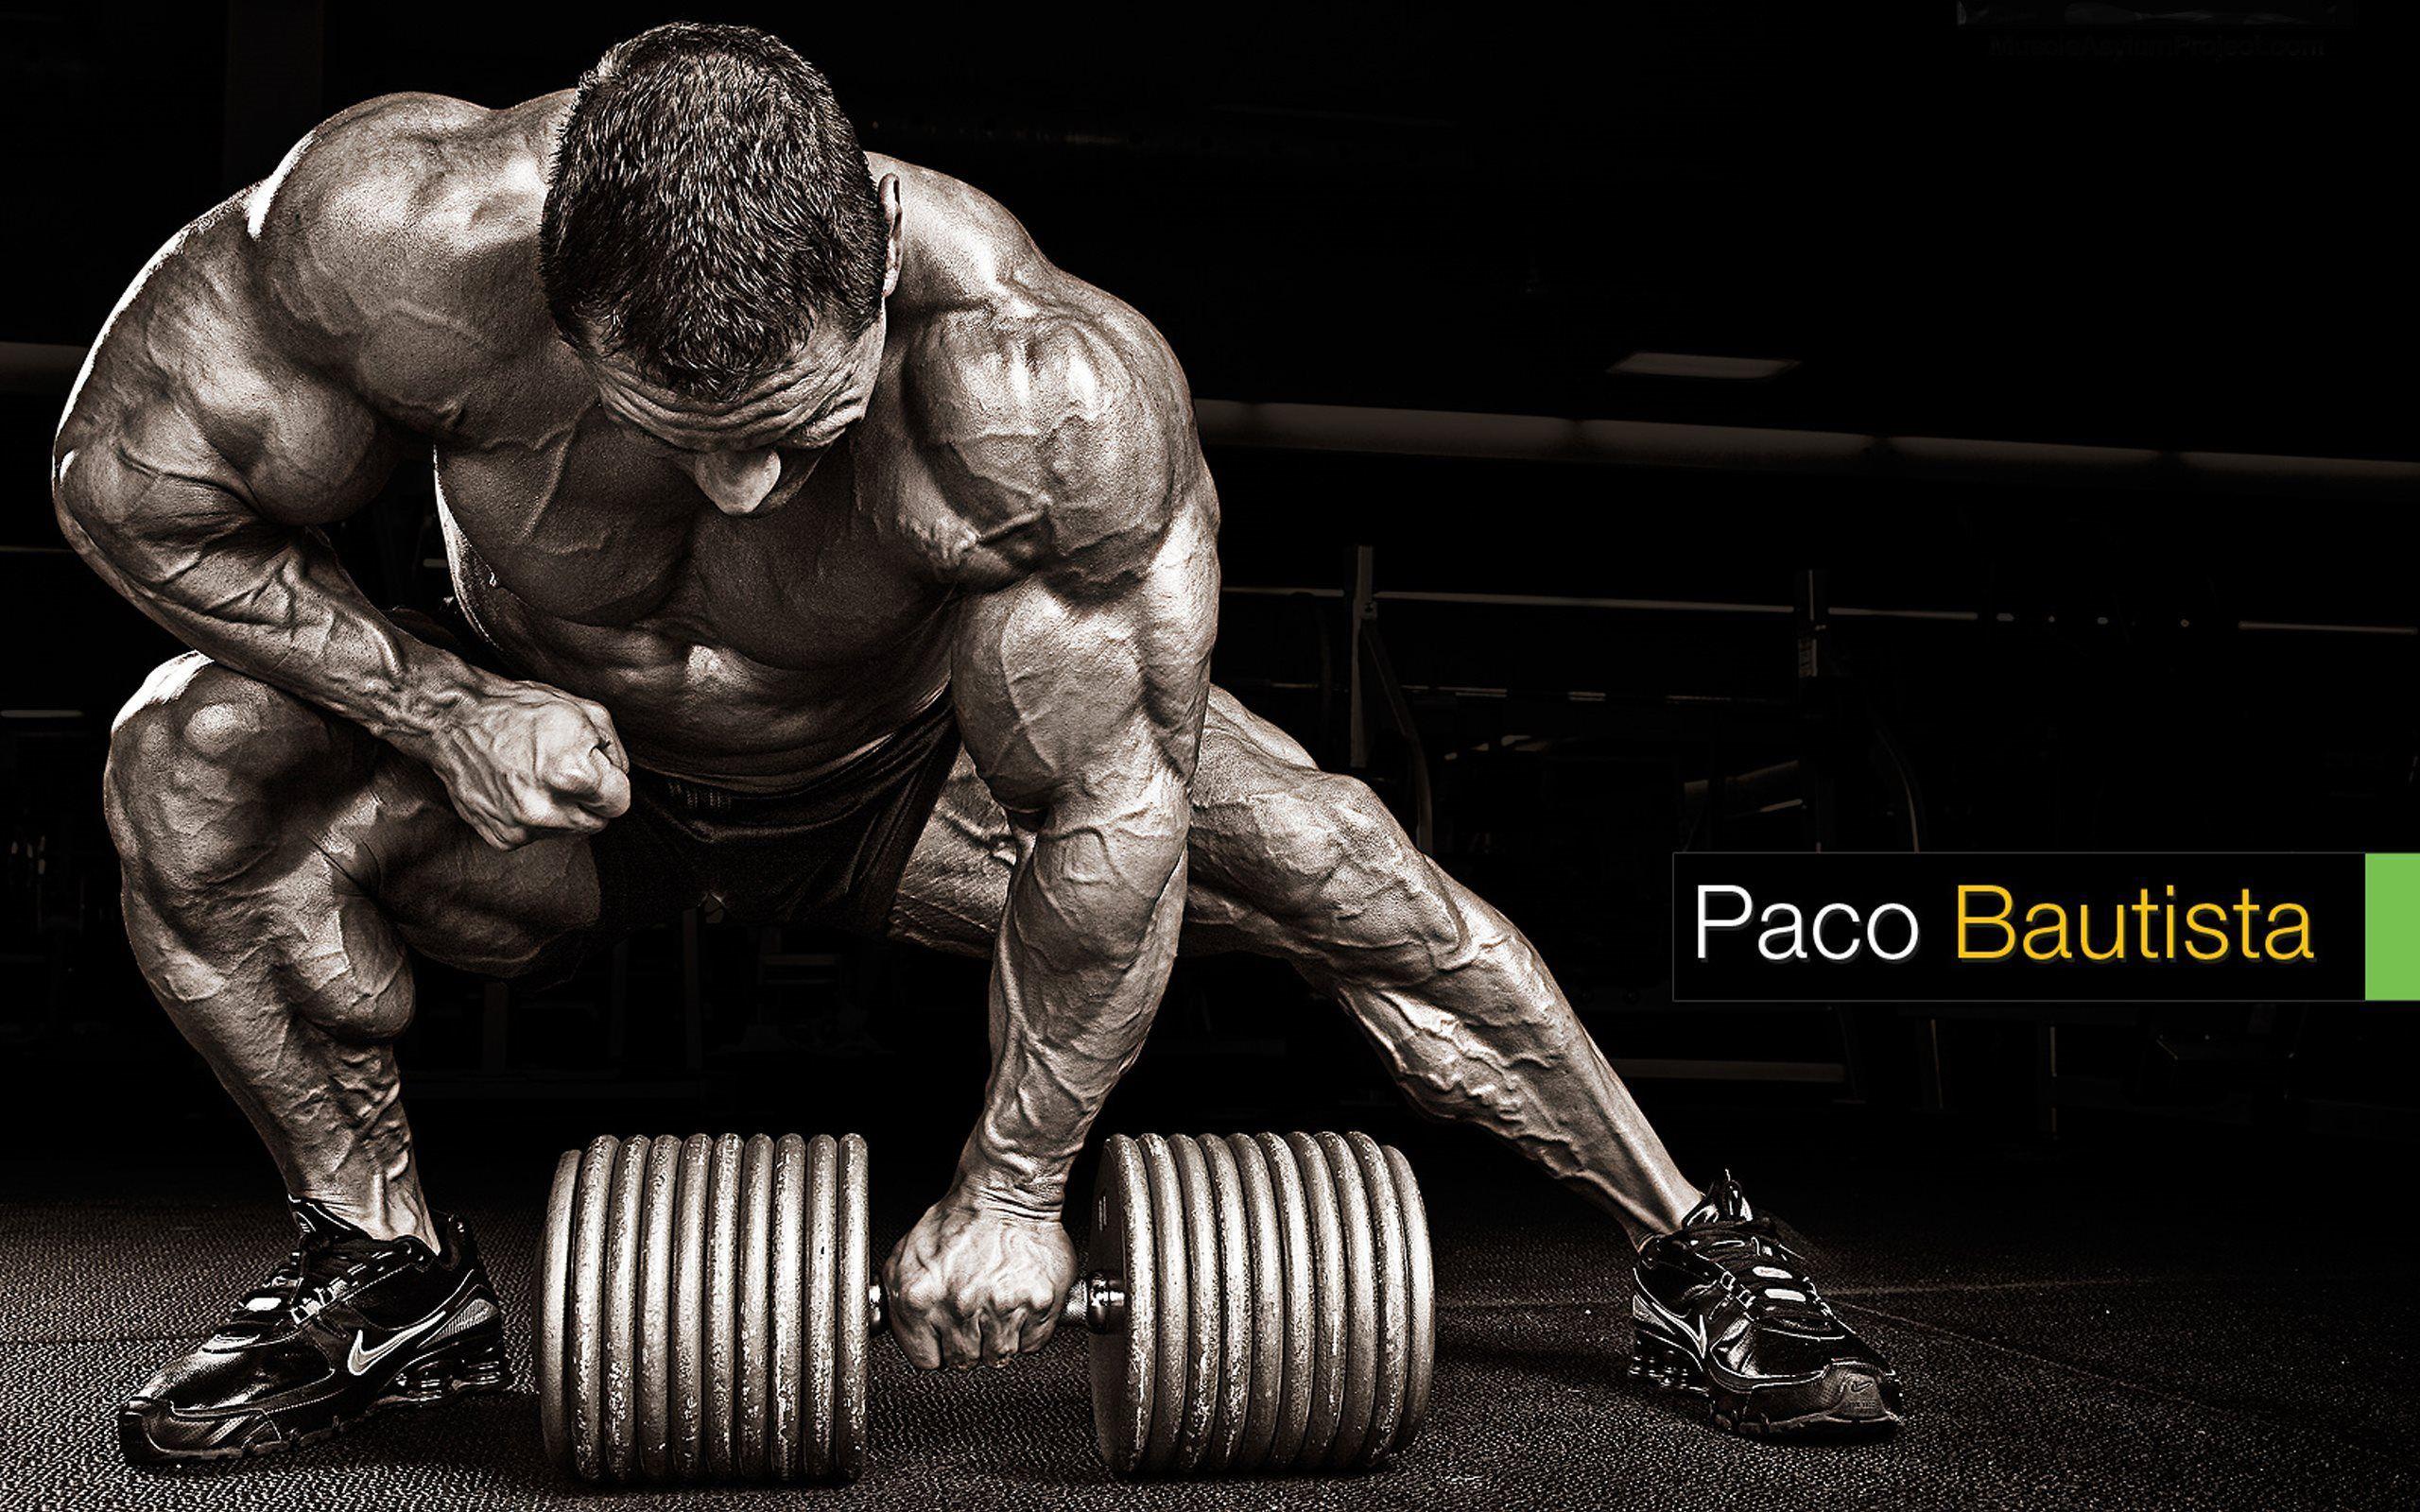 Download wallpaper Paco Bautista, bodybuilding, athlete, muscles